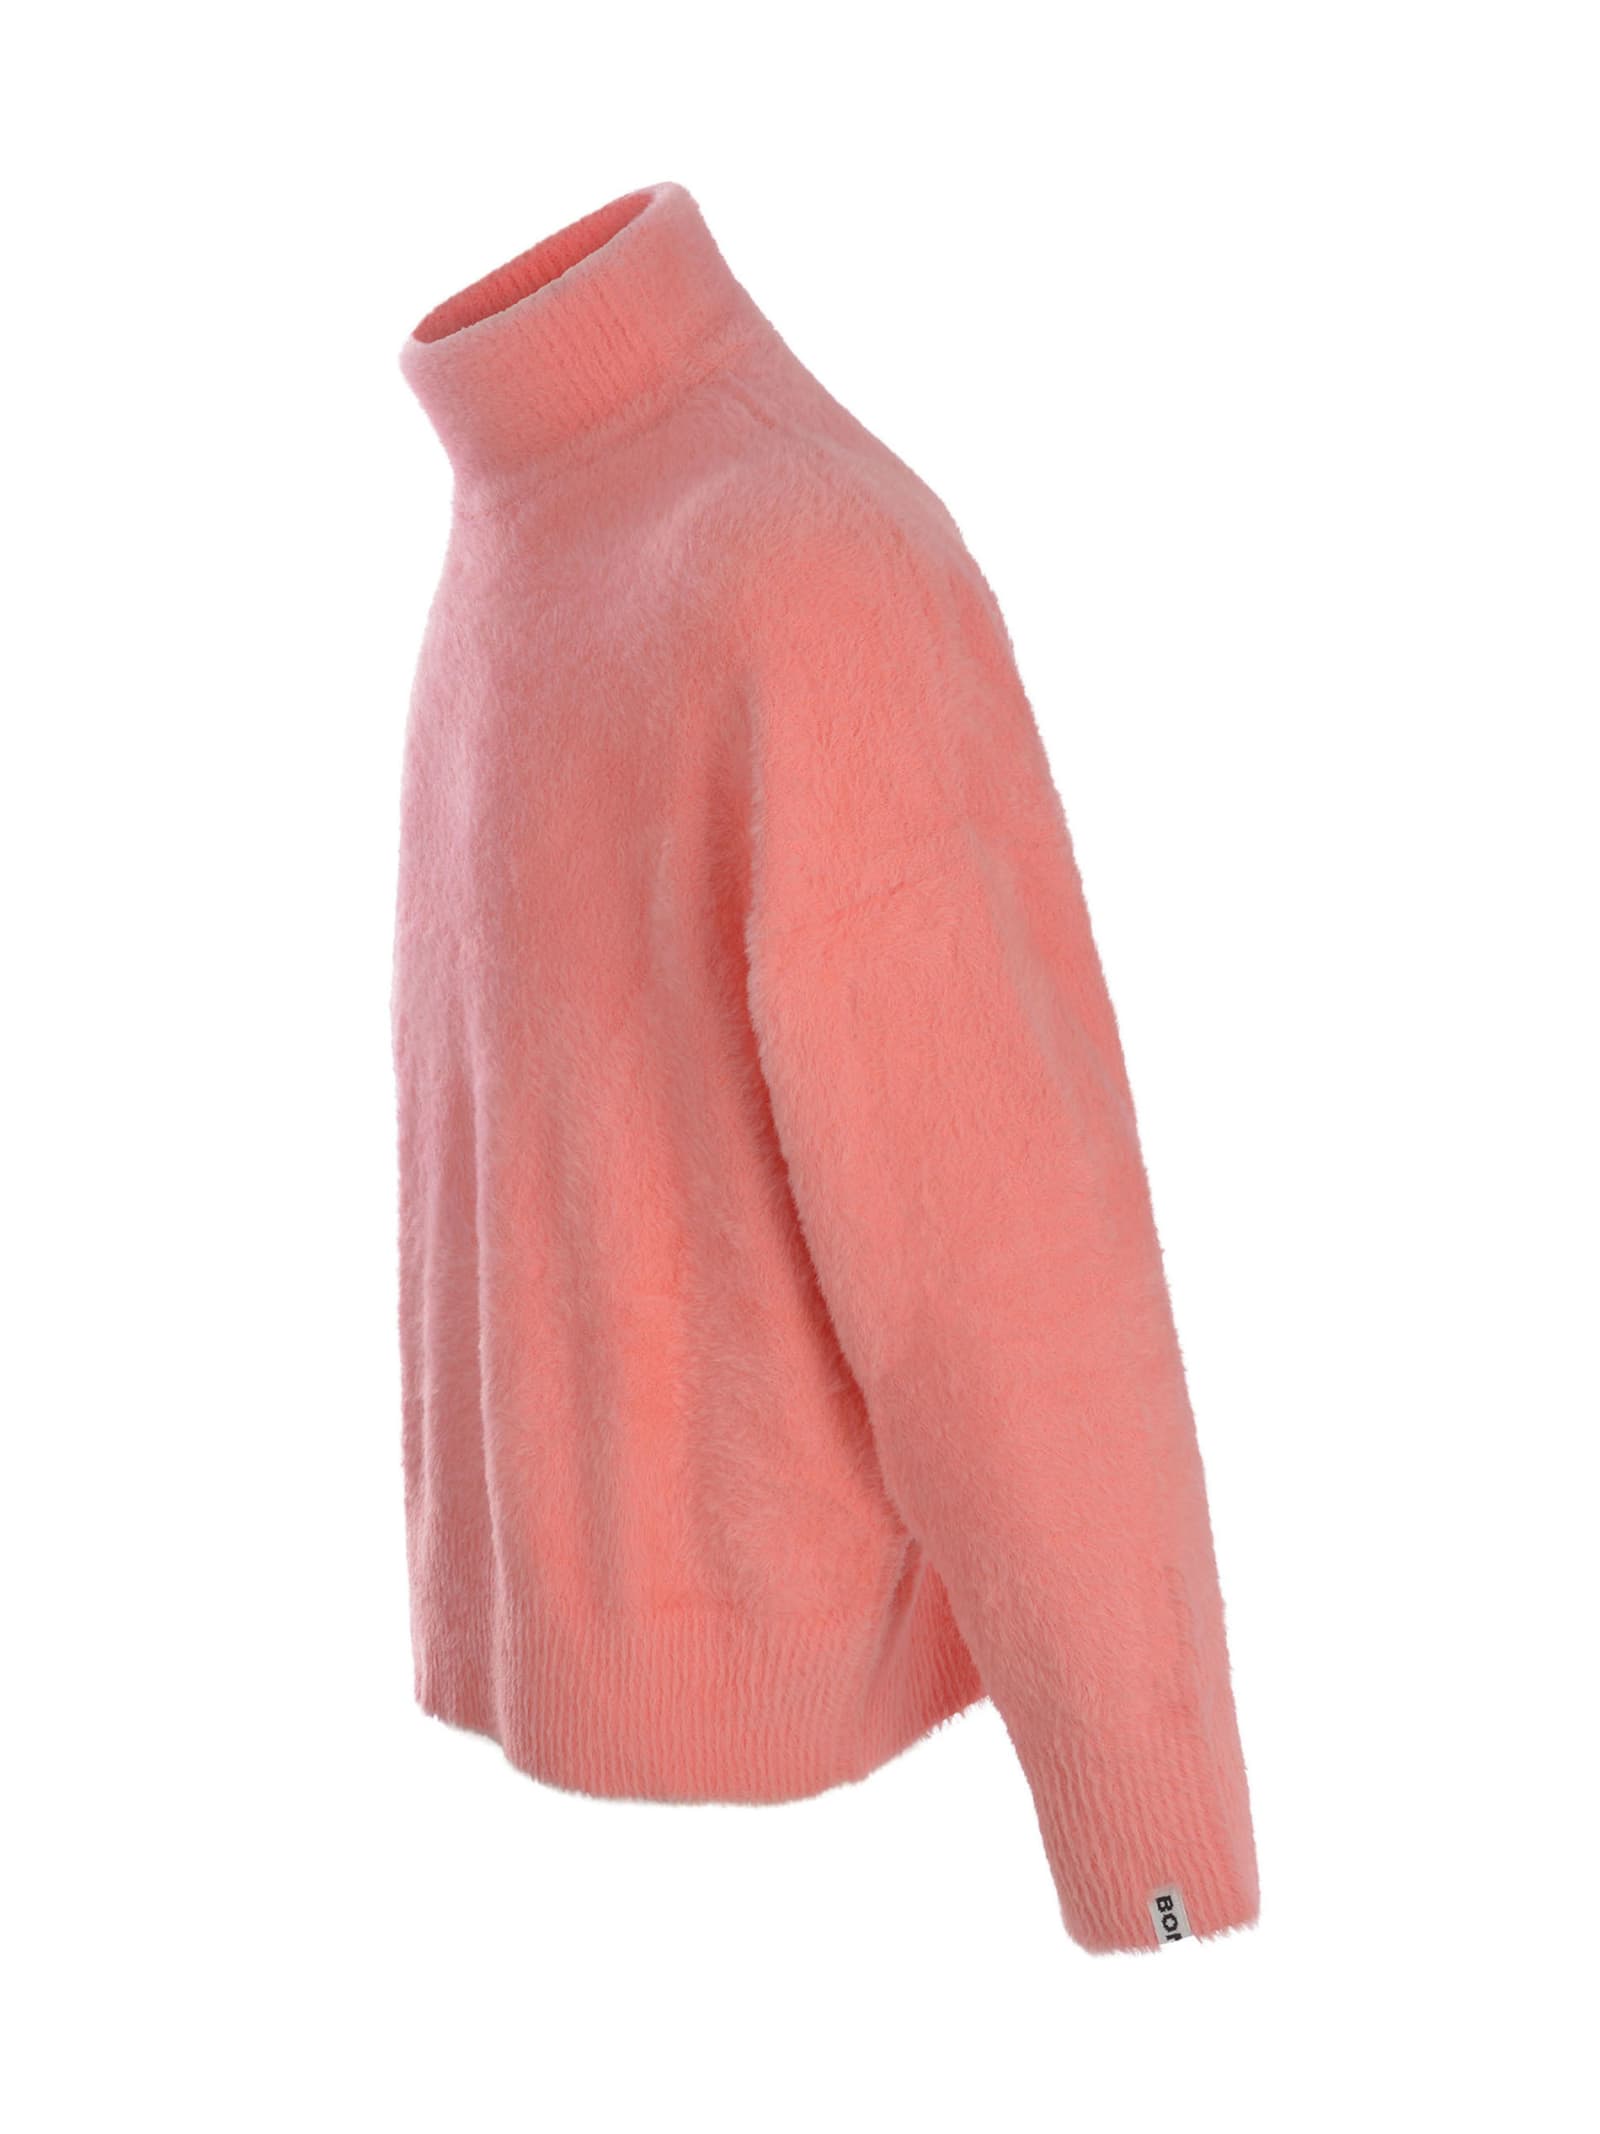 Shop Bonsai Sweater  Made Of Soft Fabric In Rosa